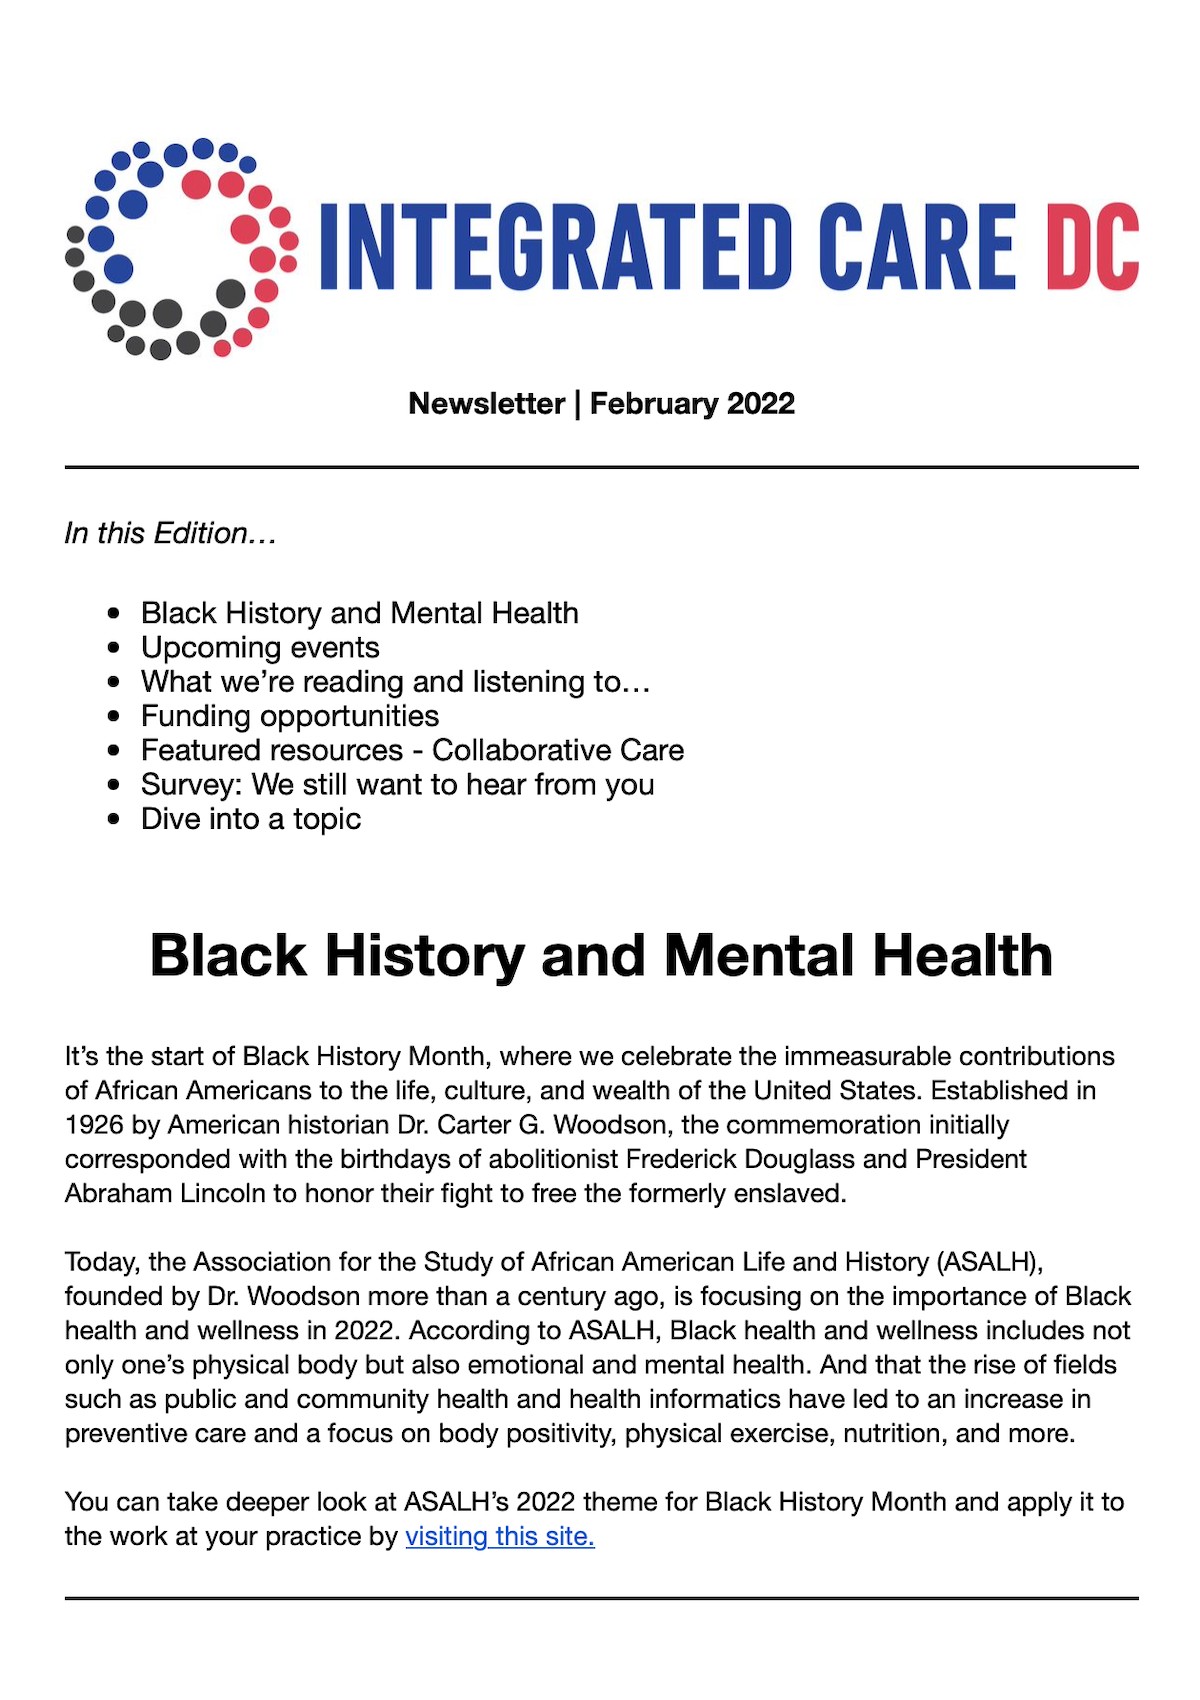 Integrated Care February Newsletter Image